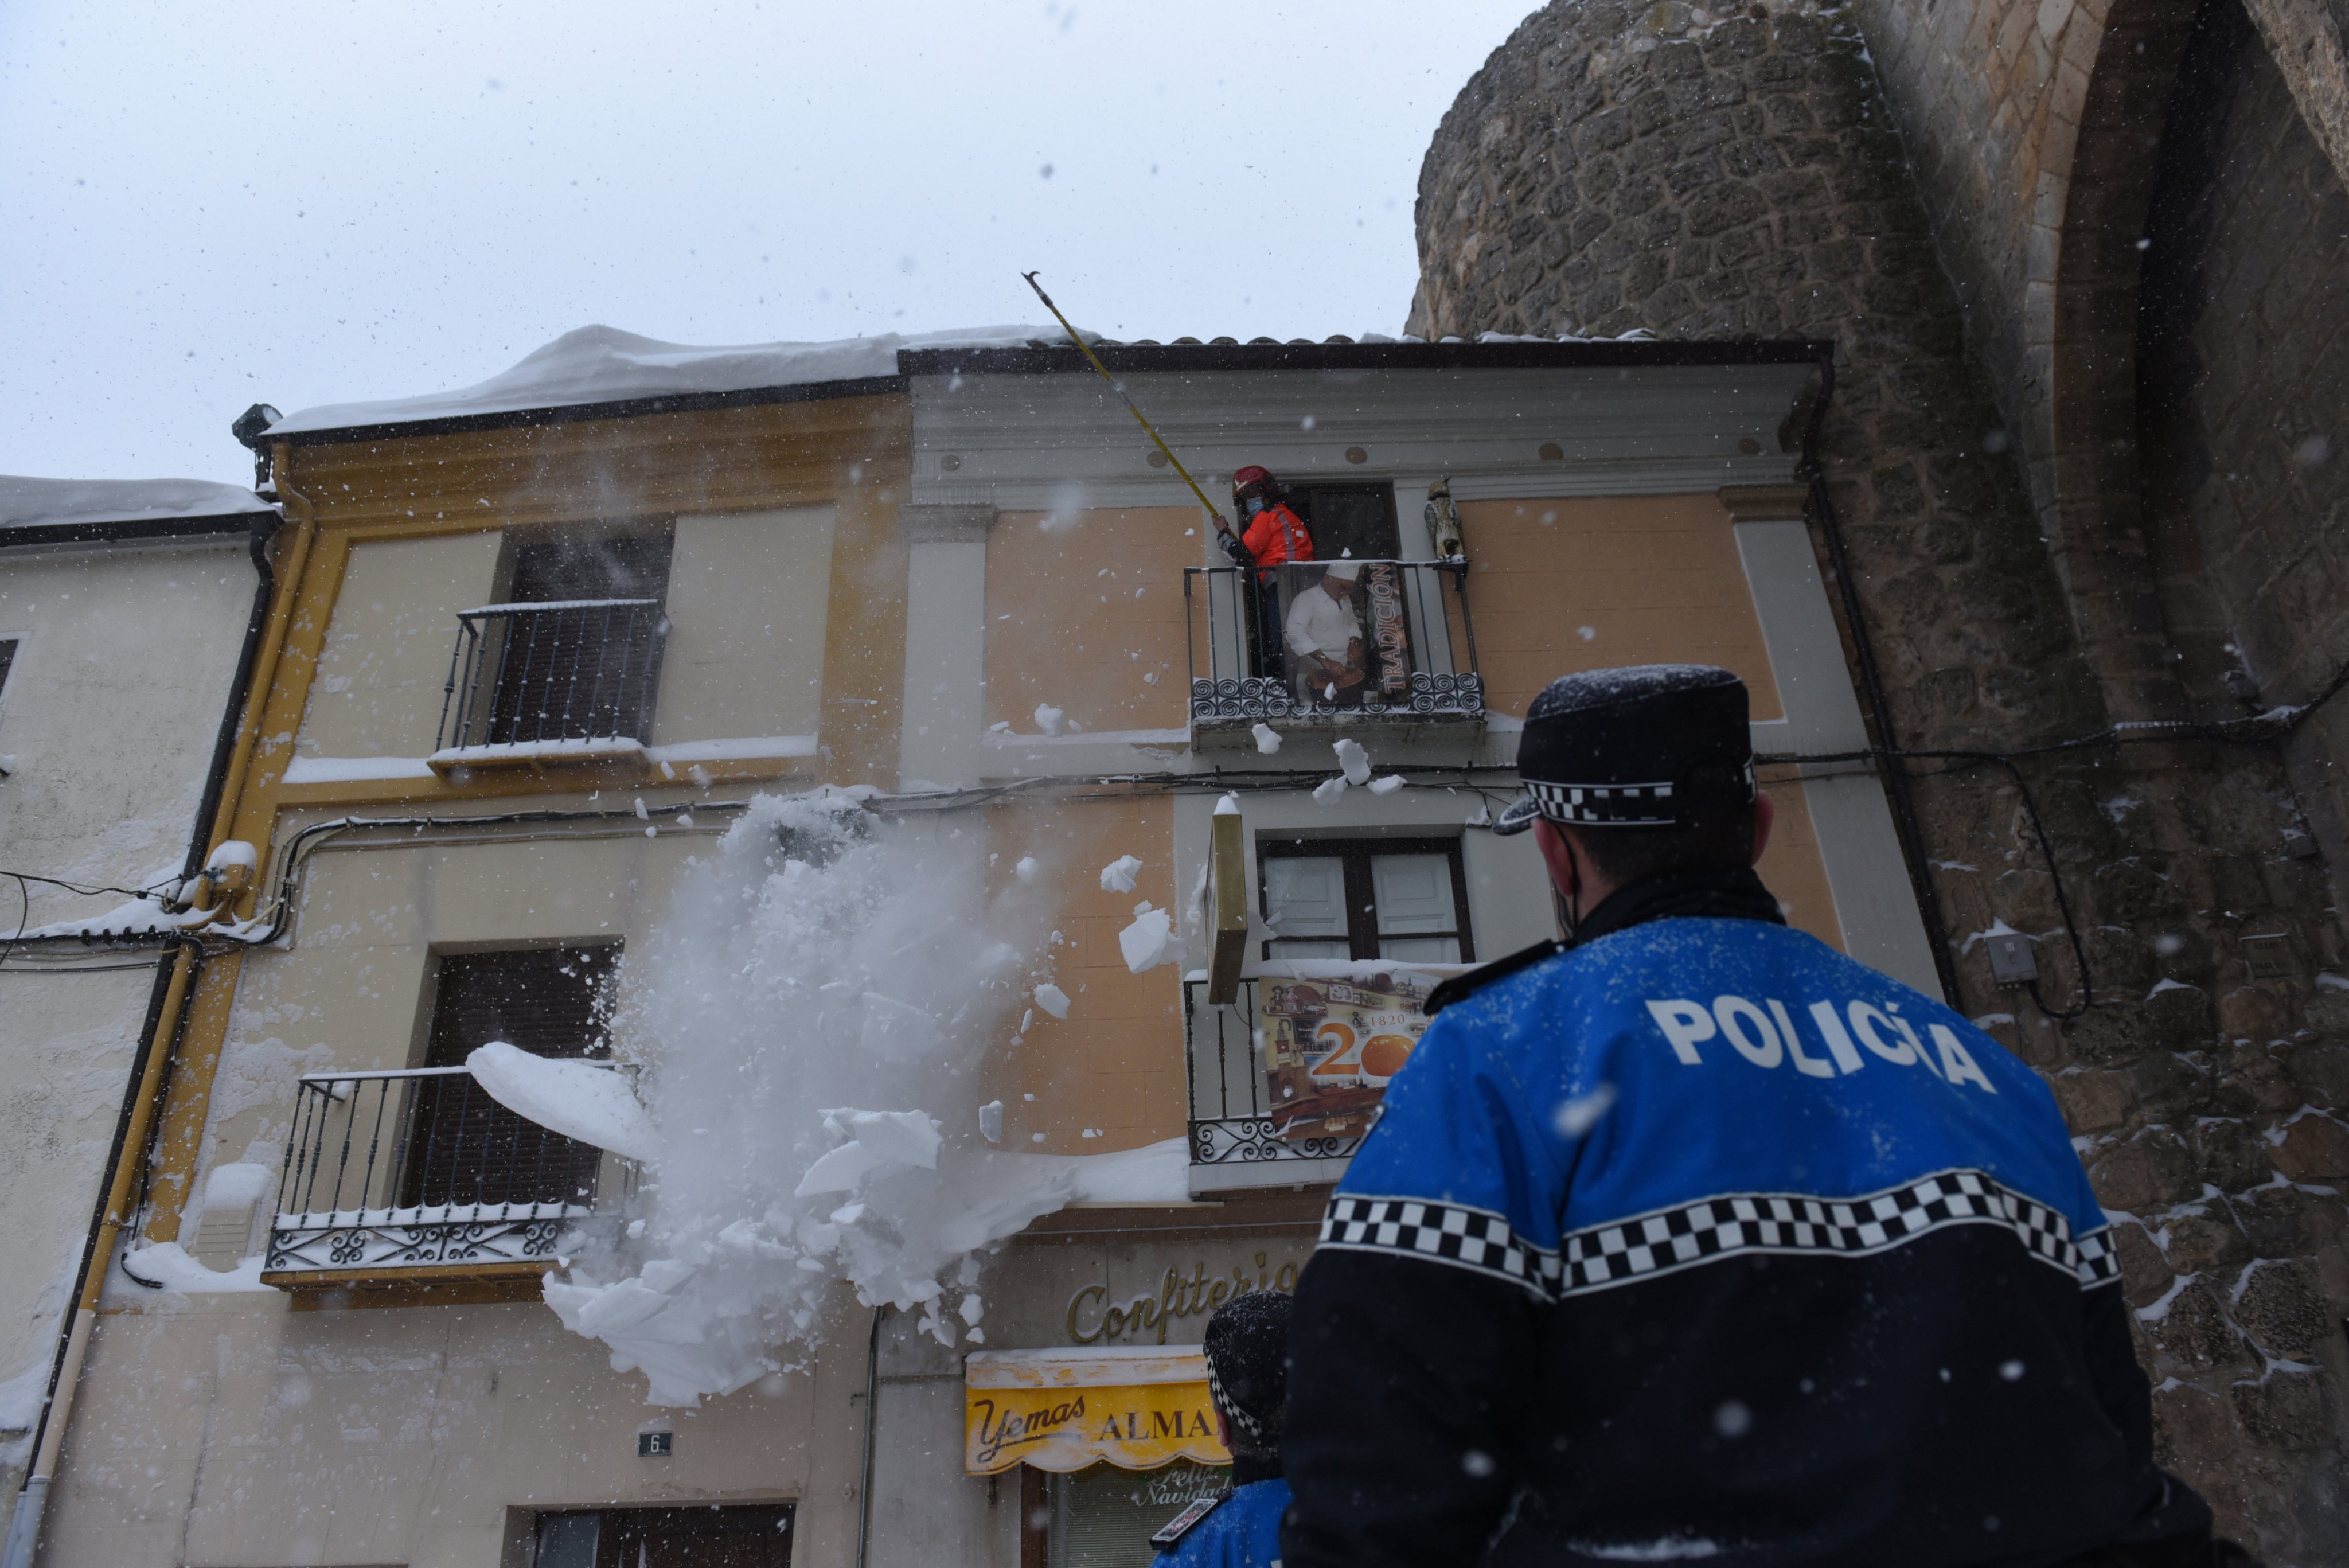 A firefighter cleans snow from a roof during the Filomena